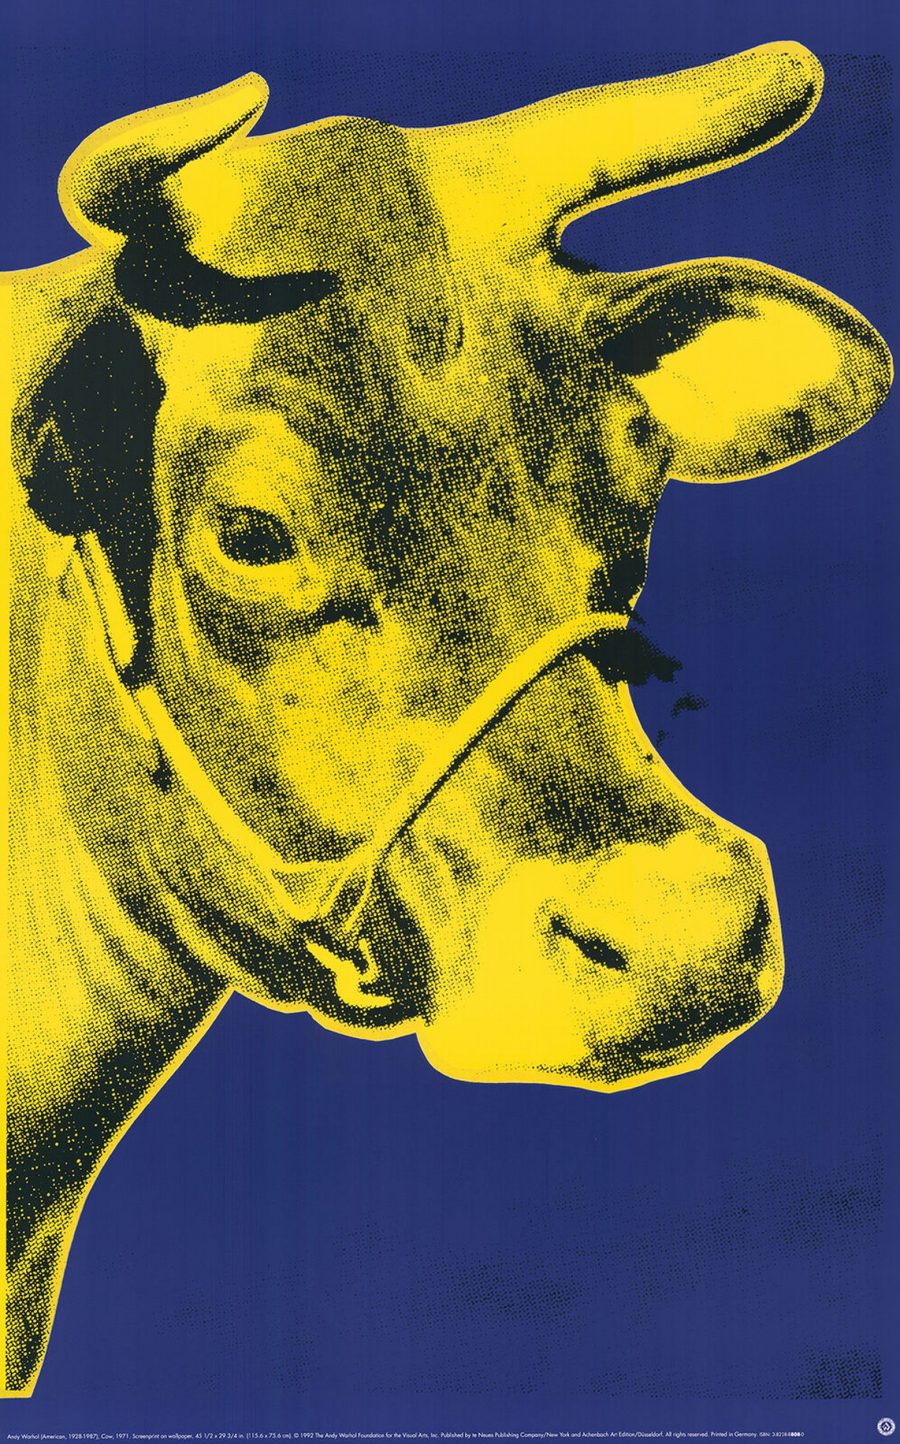 Cow (yellow) - Andy Warhol (after)